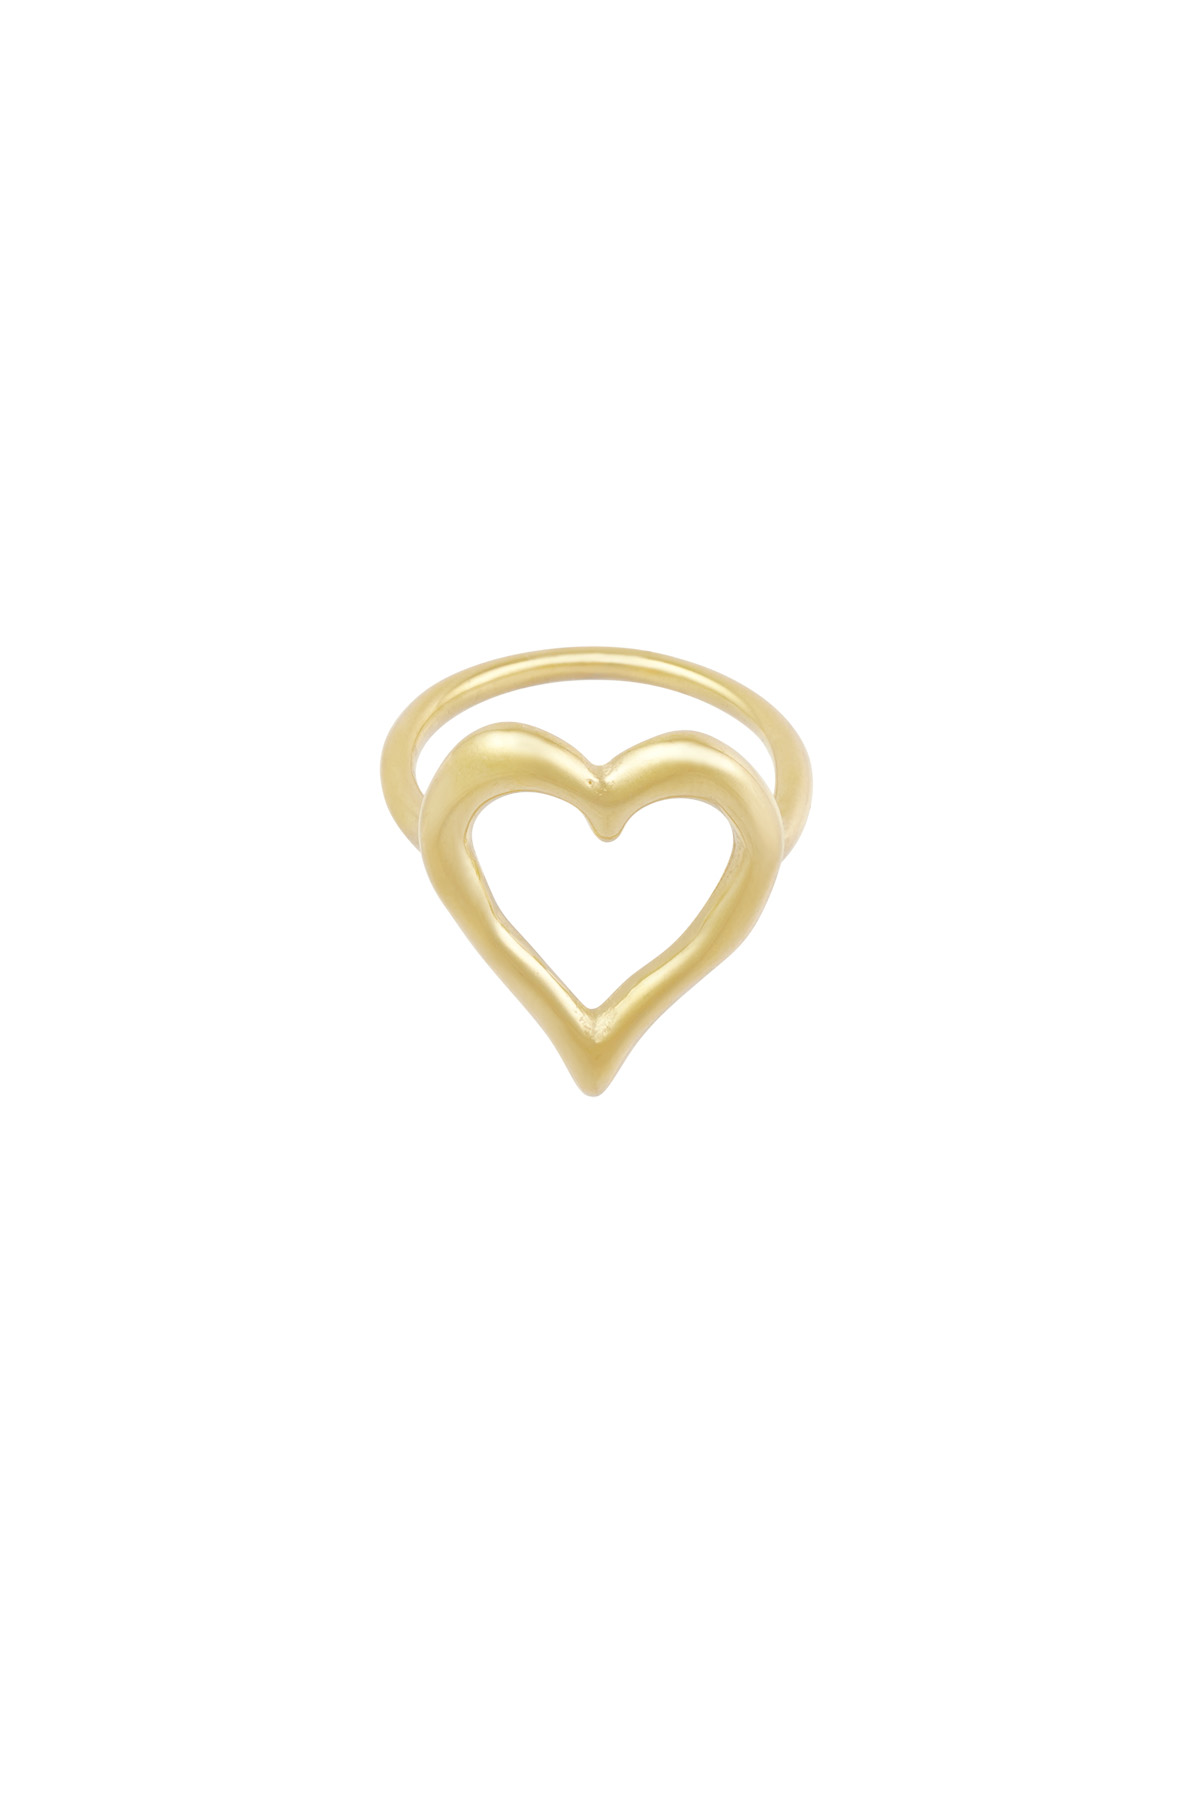 Structured heart ring - gold 16 